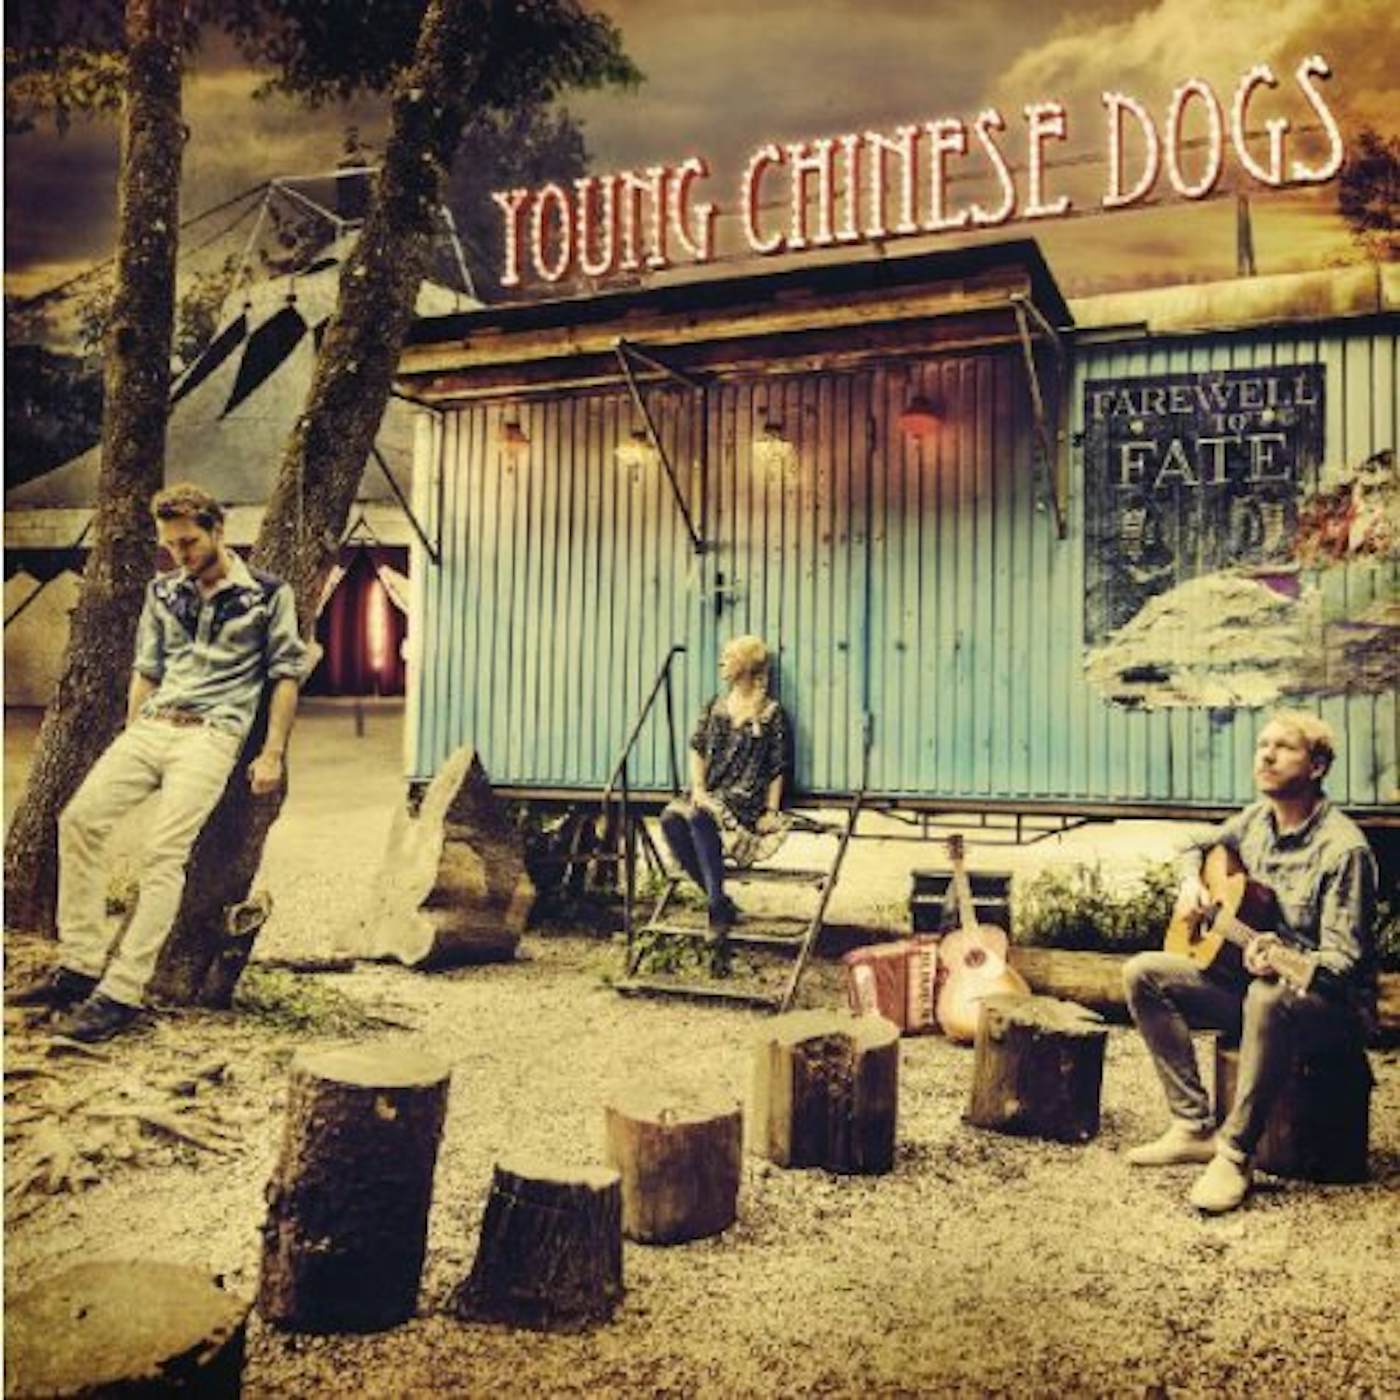 Young Chinese Dogs FAREWELL TO FATE CD